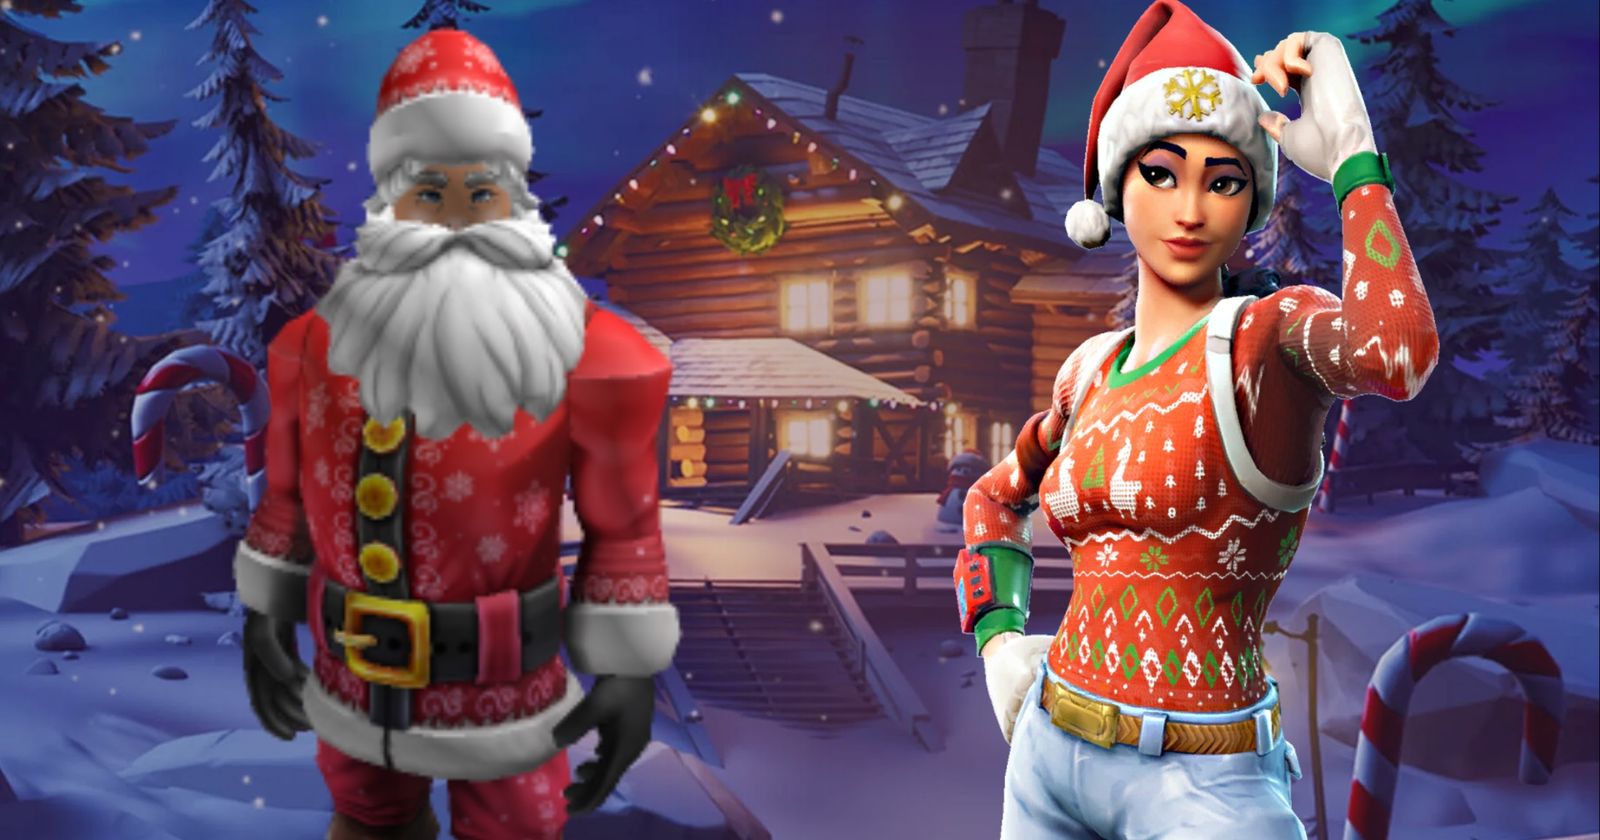 All kids want for Christmas this year … Robux and gaming subscri